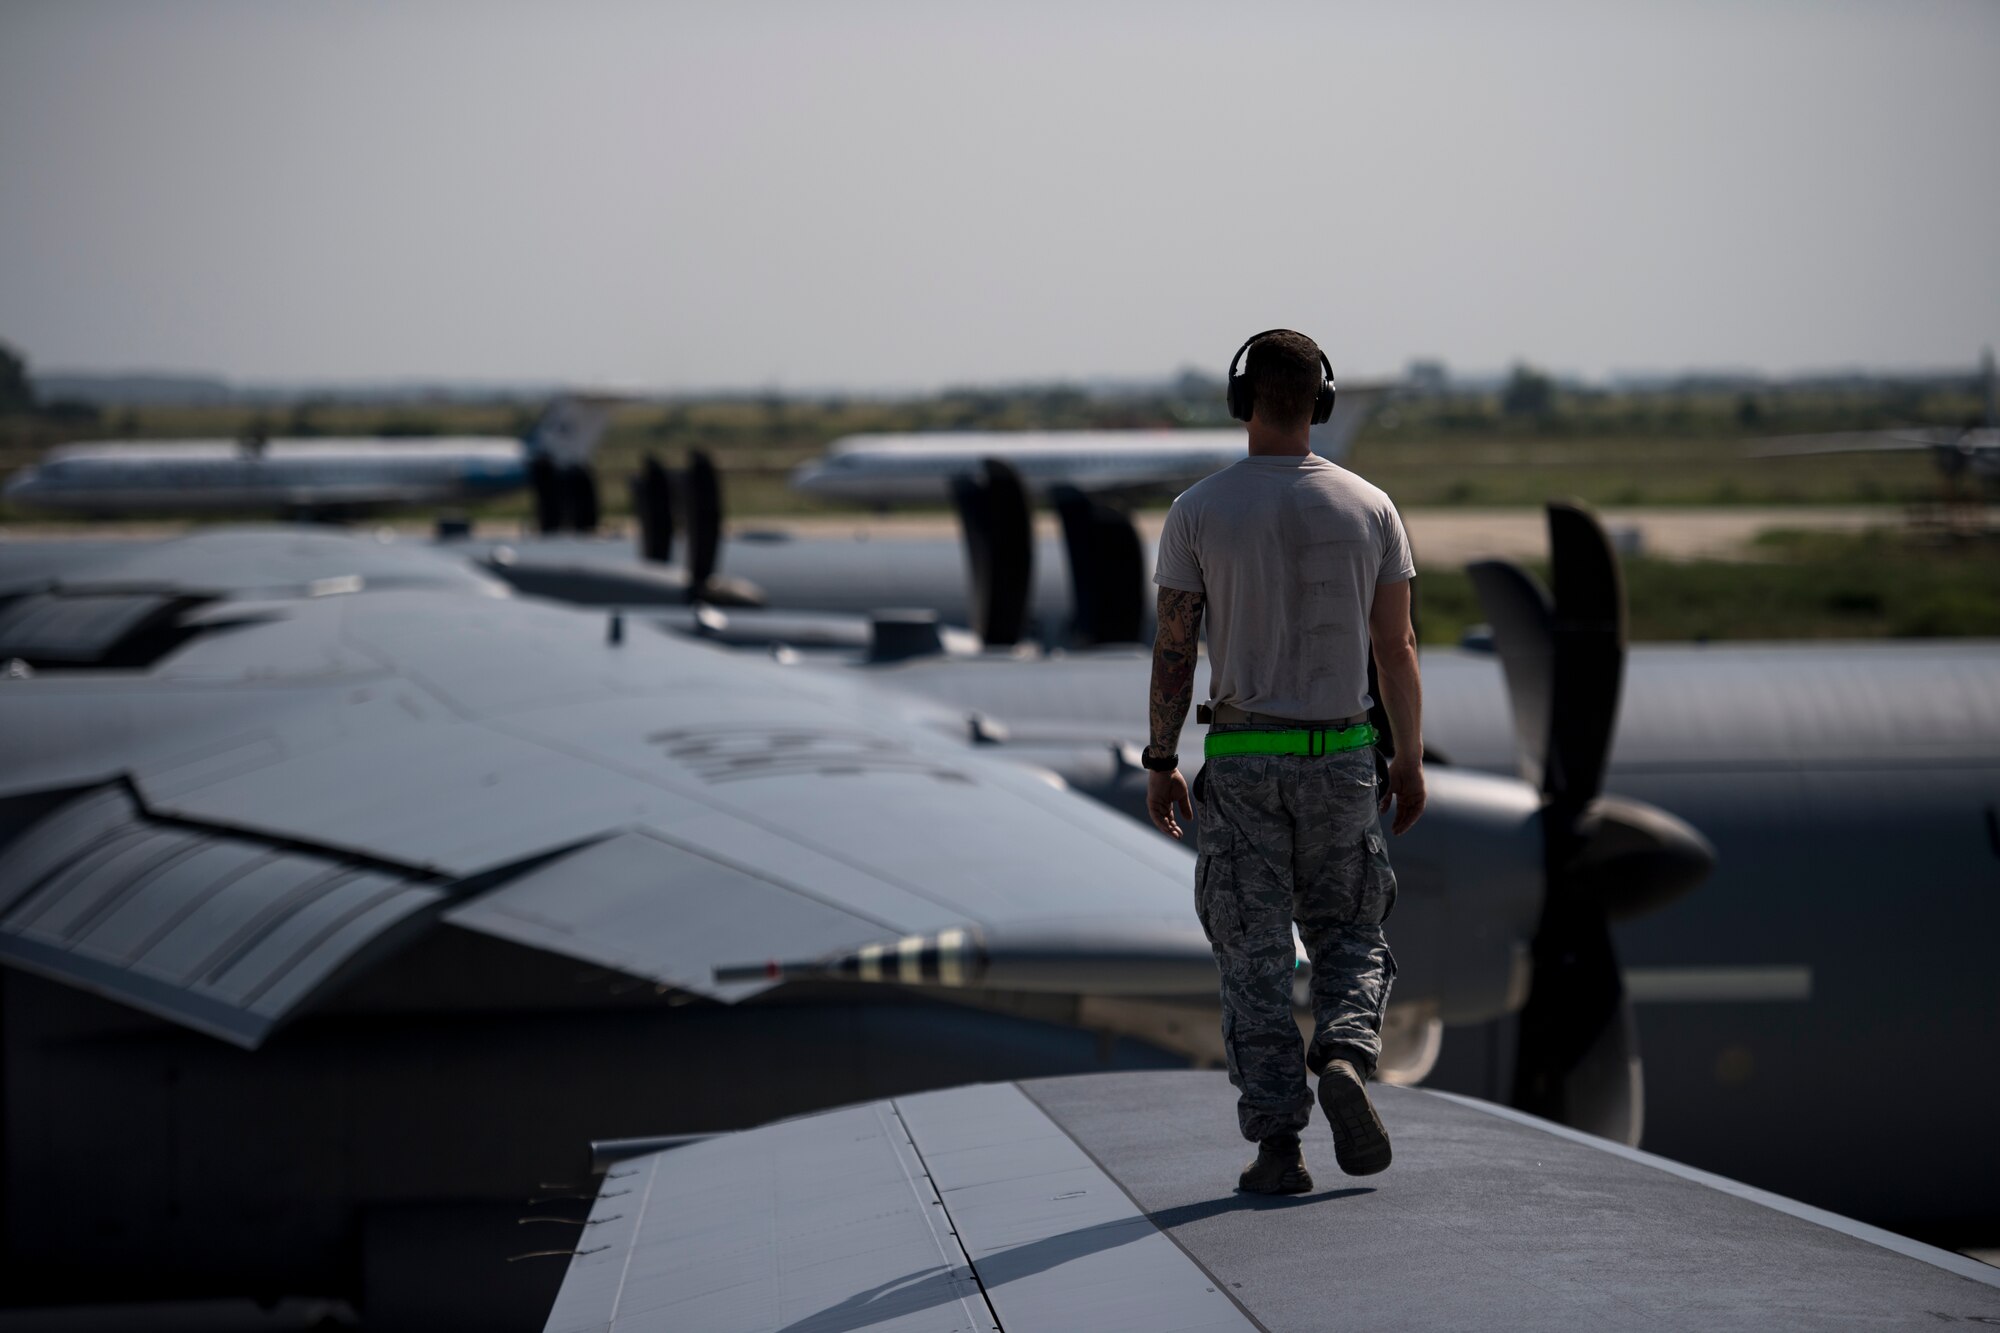 A U.S. Air Force Airman assigned to the 86th Aircraft Maintenance Squadron, walks down the wing of a C-130J Super Hercules aircraft assigned to the 37th Airlift Squadron, during a pre-flight inspection at Otopeni Air Base, Romania, Aug. 21, 2018. The C-130Js were flown over Romania as part of Carpathian Summer 2018, an annual exercise between the U.S. Air Force and Romanian air force. (U.S. Air Force photo by Senior Airman Devin Boyer)